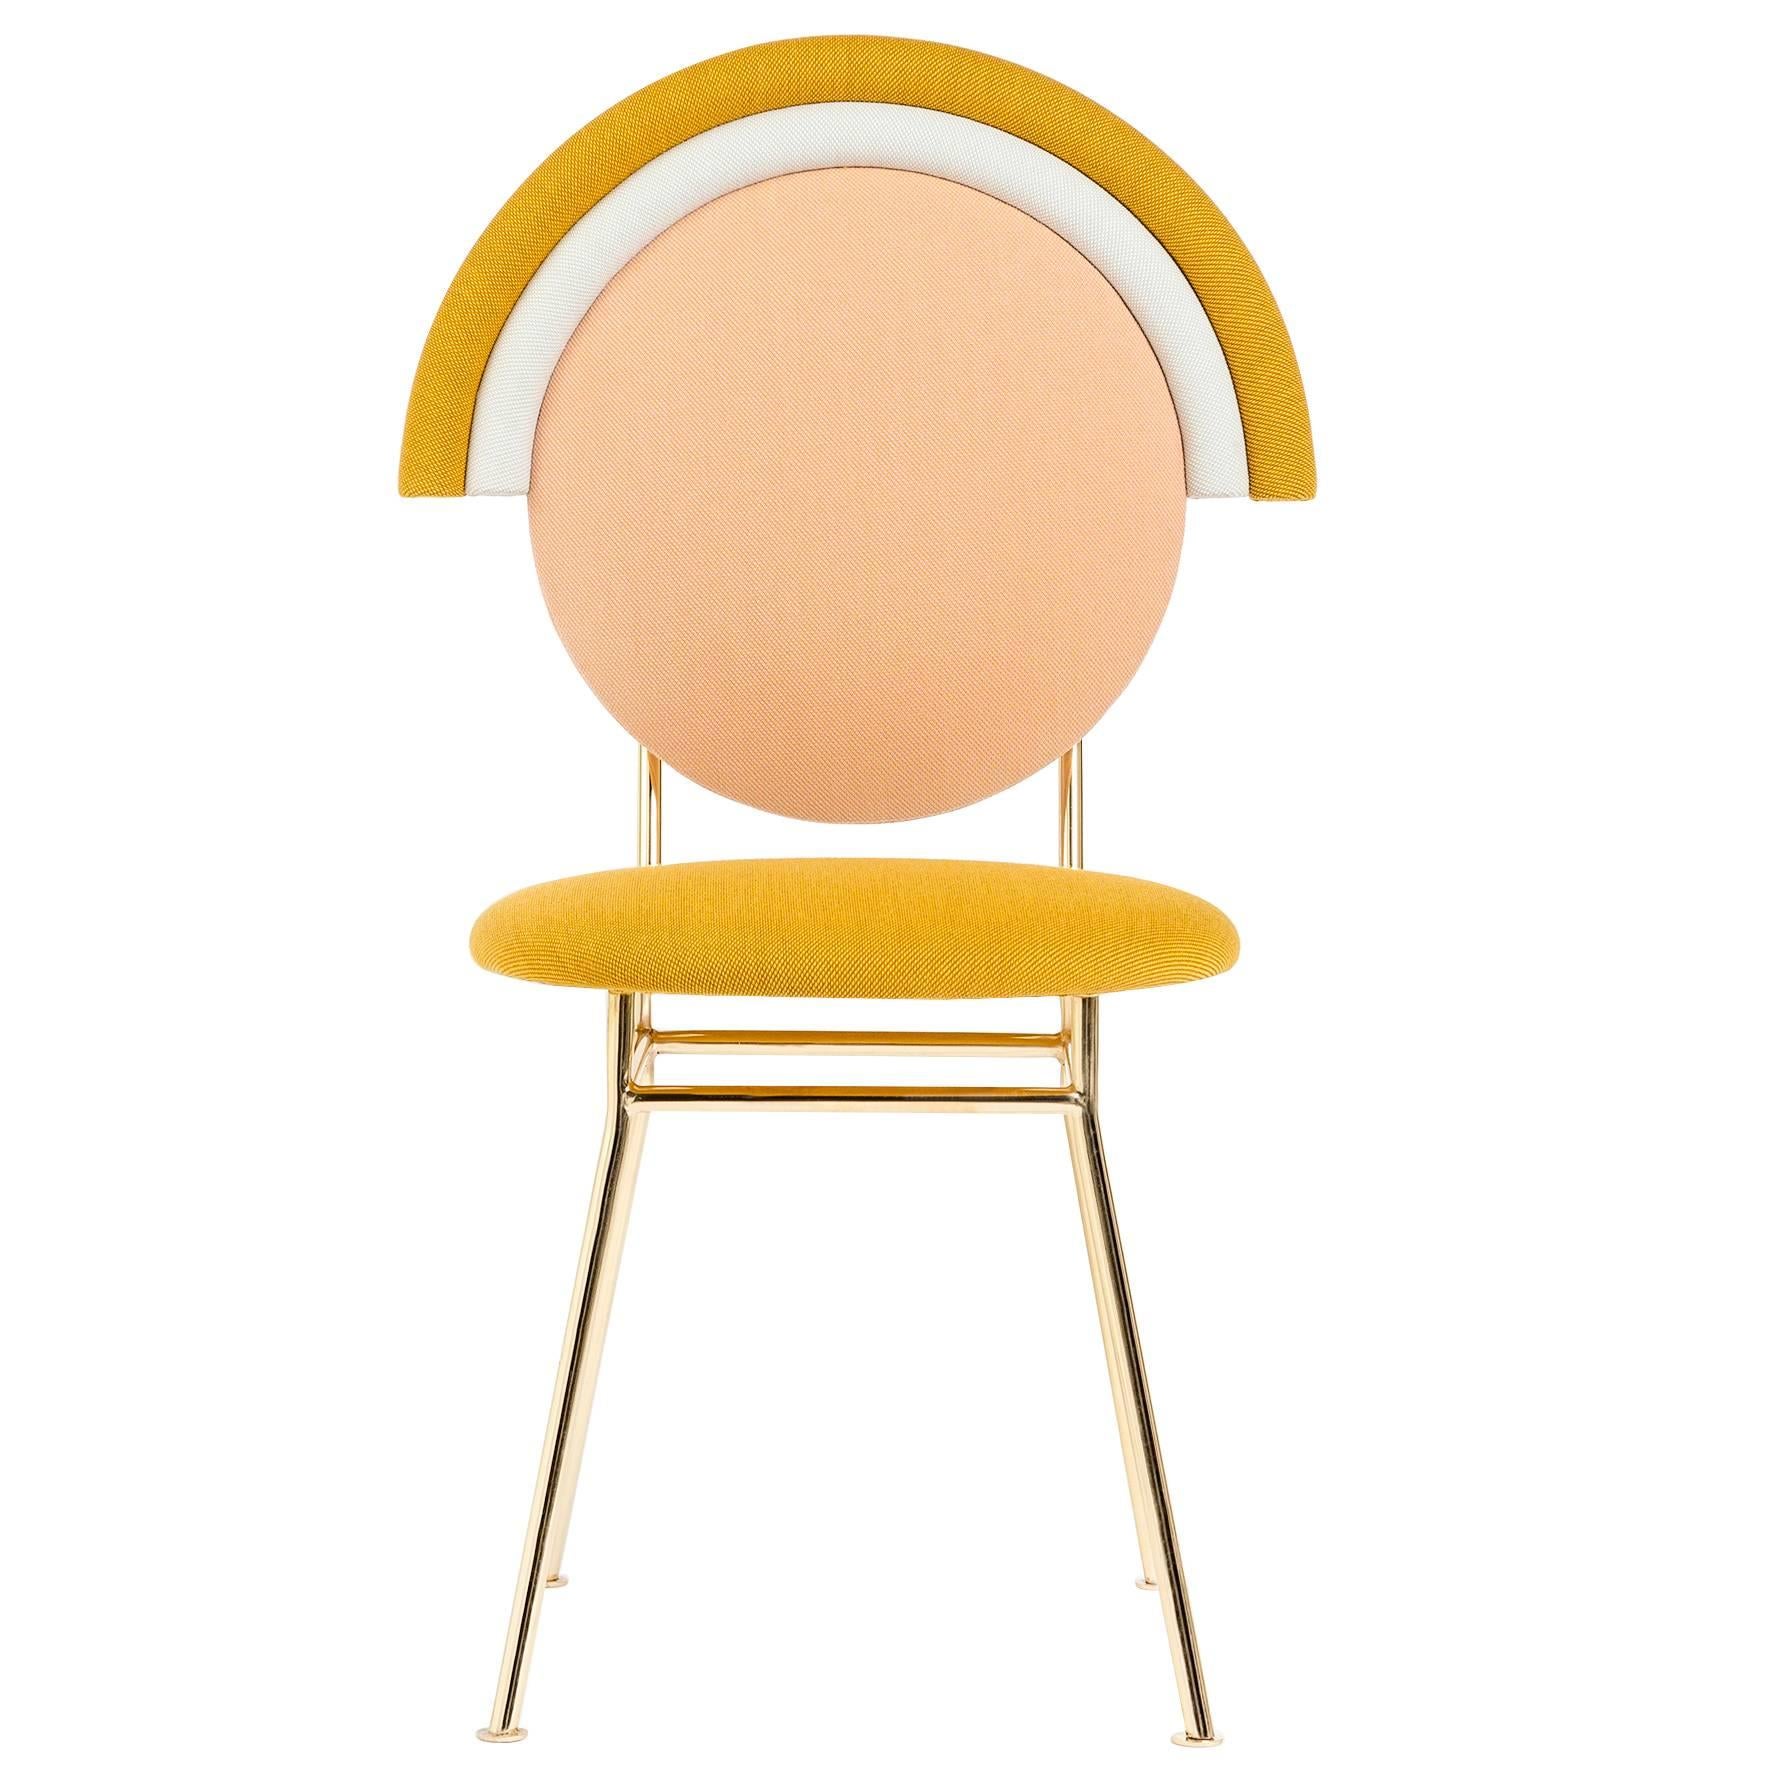 Iris Chair with Brass Finished Legs by Merve Kahraman For Sale